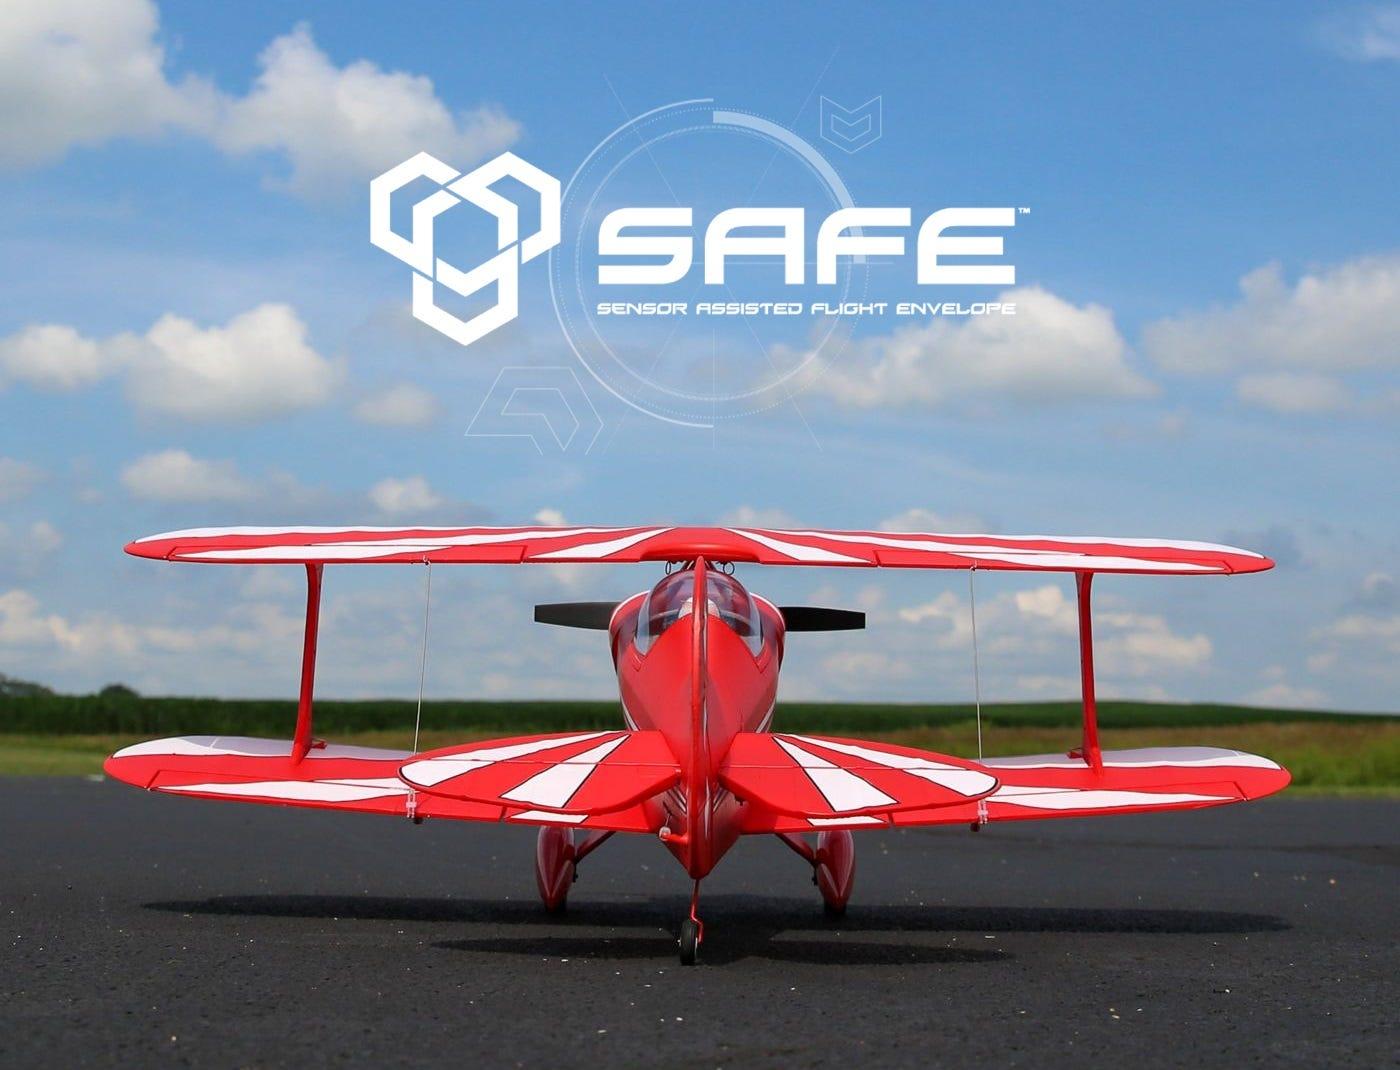 Rc Aircraft Kits: Operate RC Aircraft Kits Safely: Important Precautions to Follow